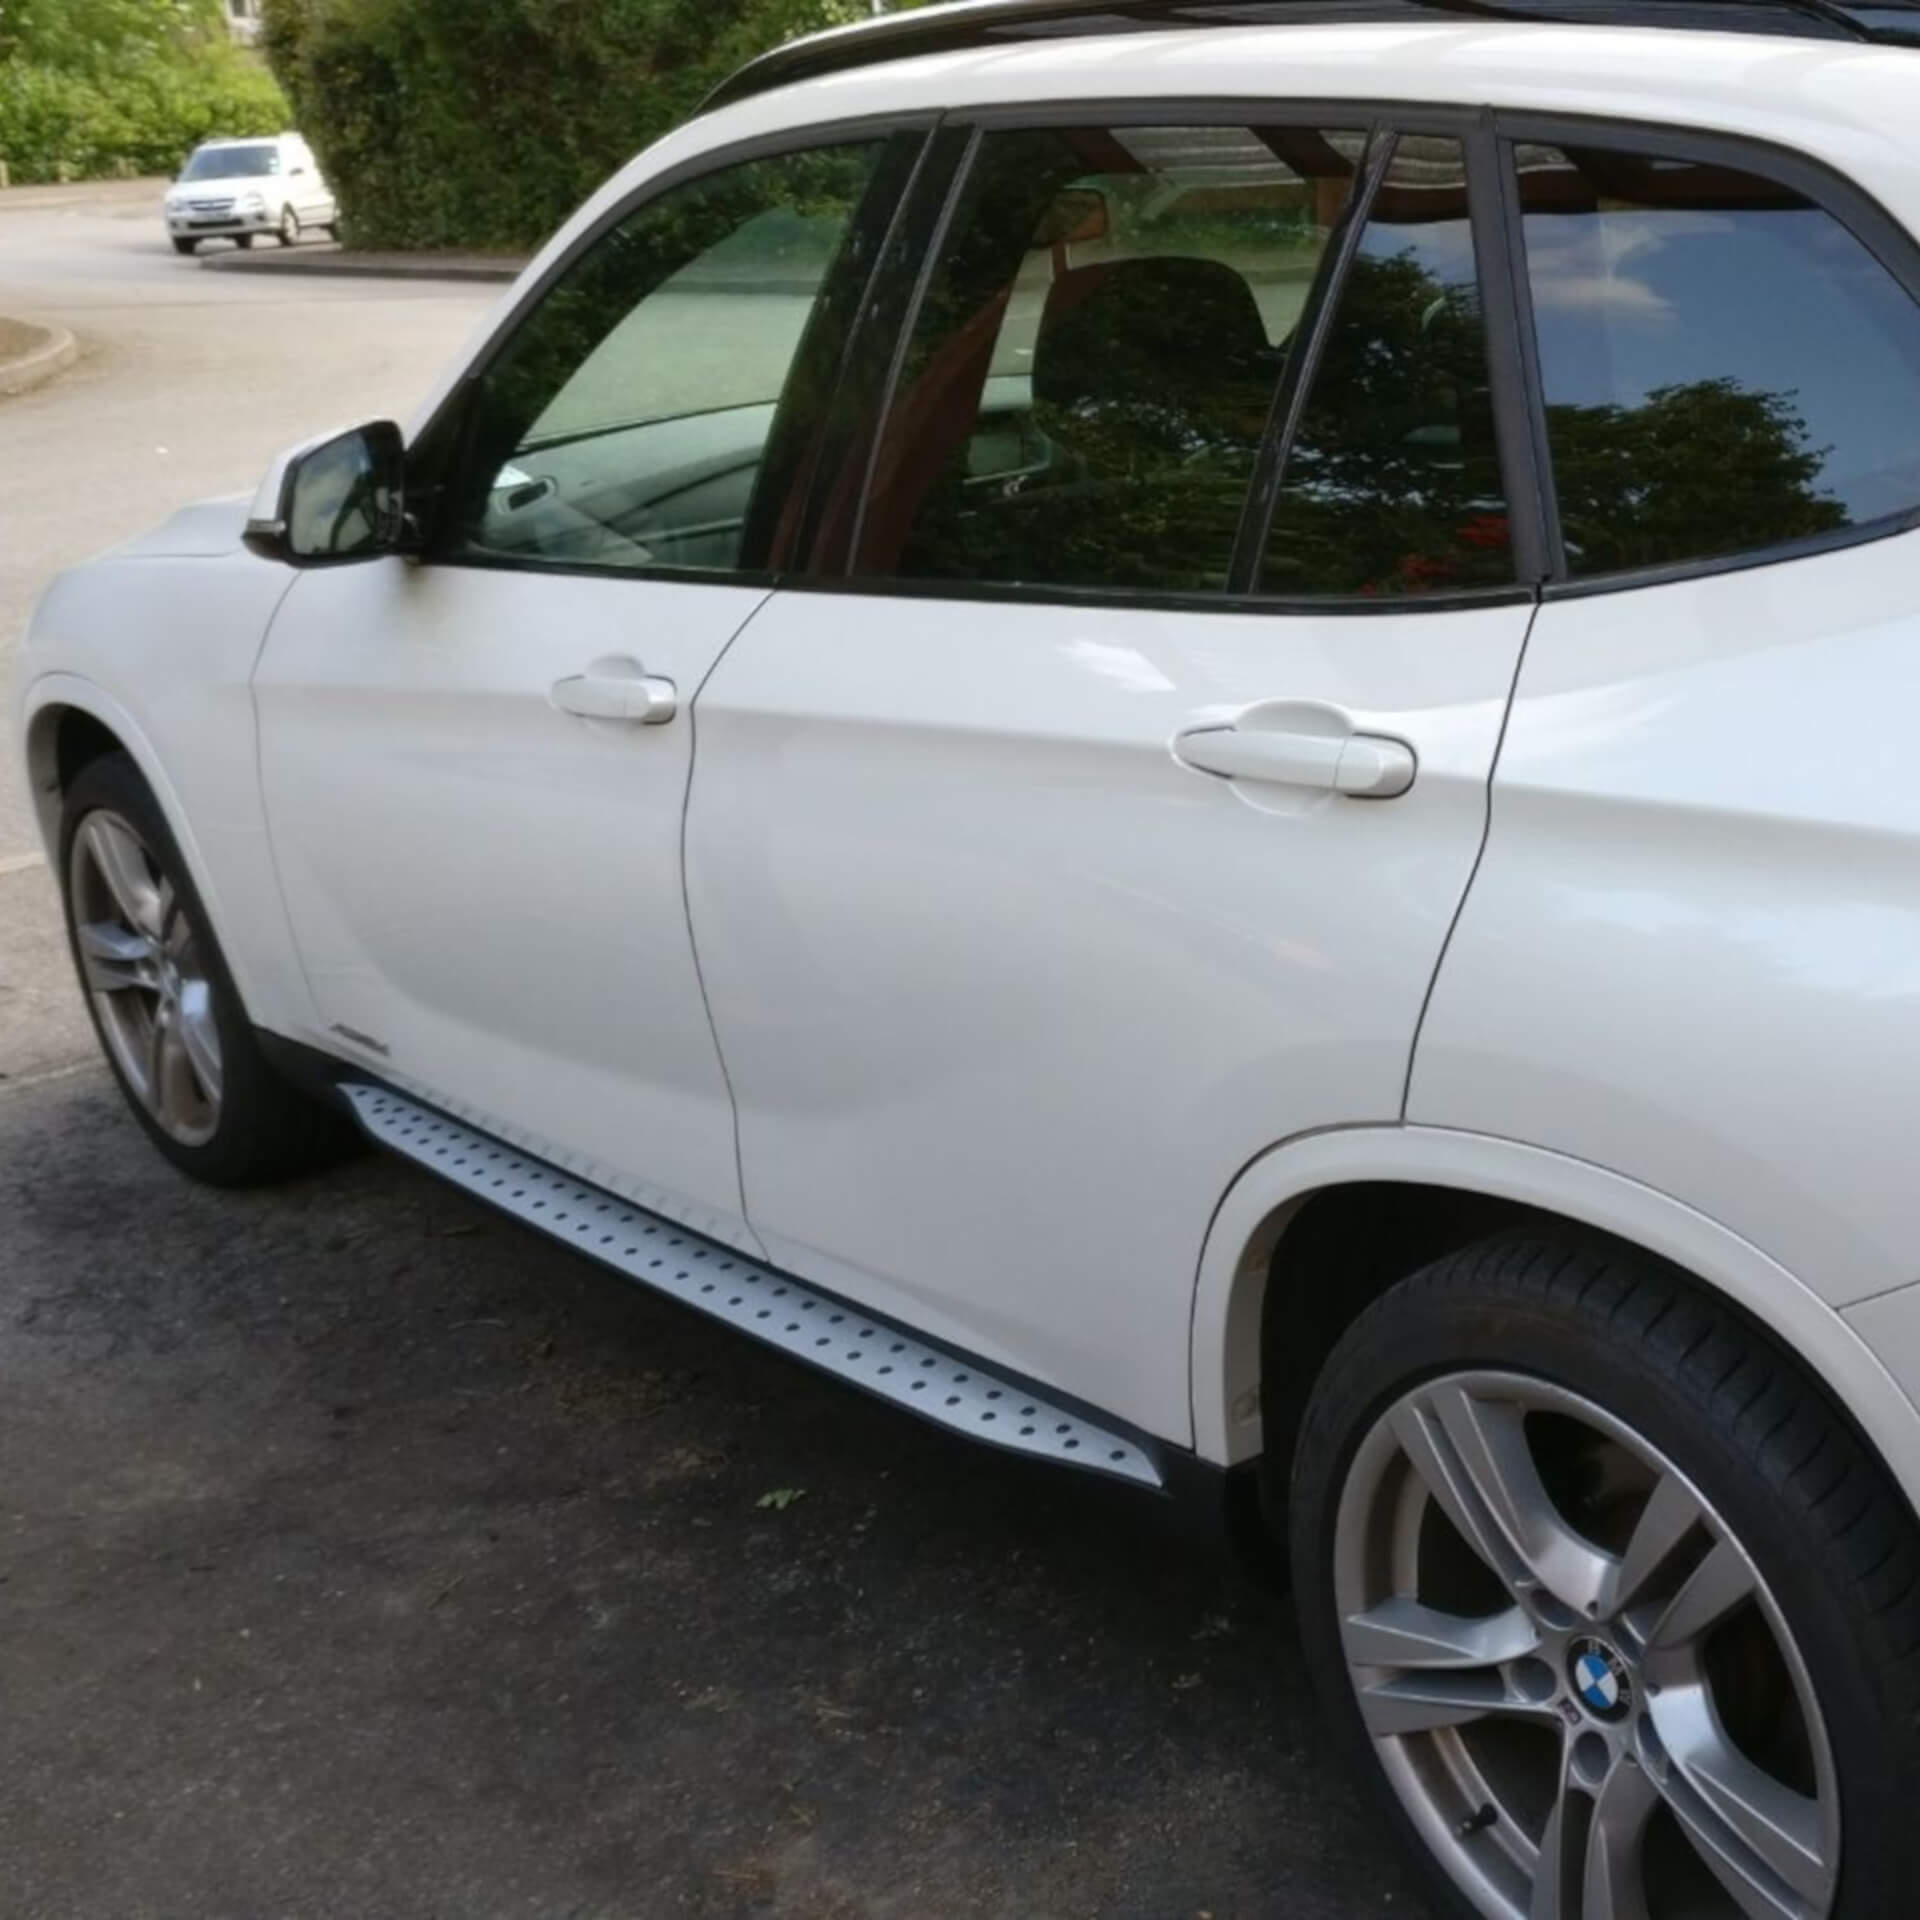 Direct4x4 accessories for BMW X1 vehicles with a photo of side steps fitted to a white BMW X1